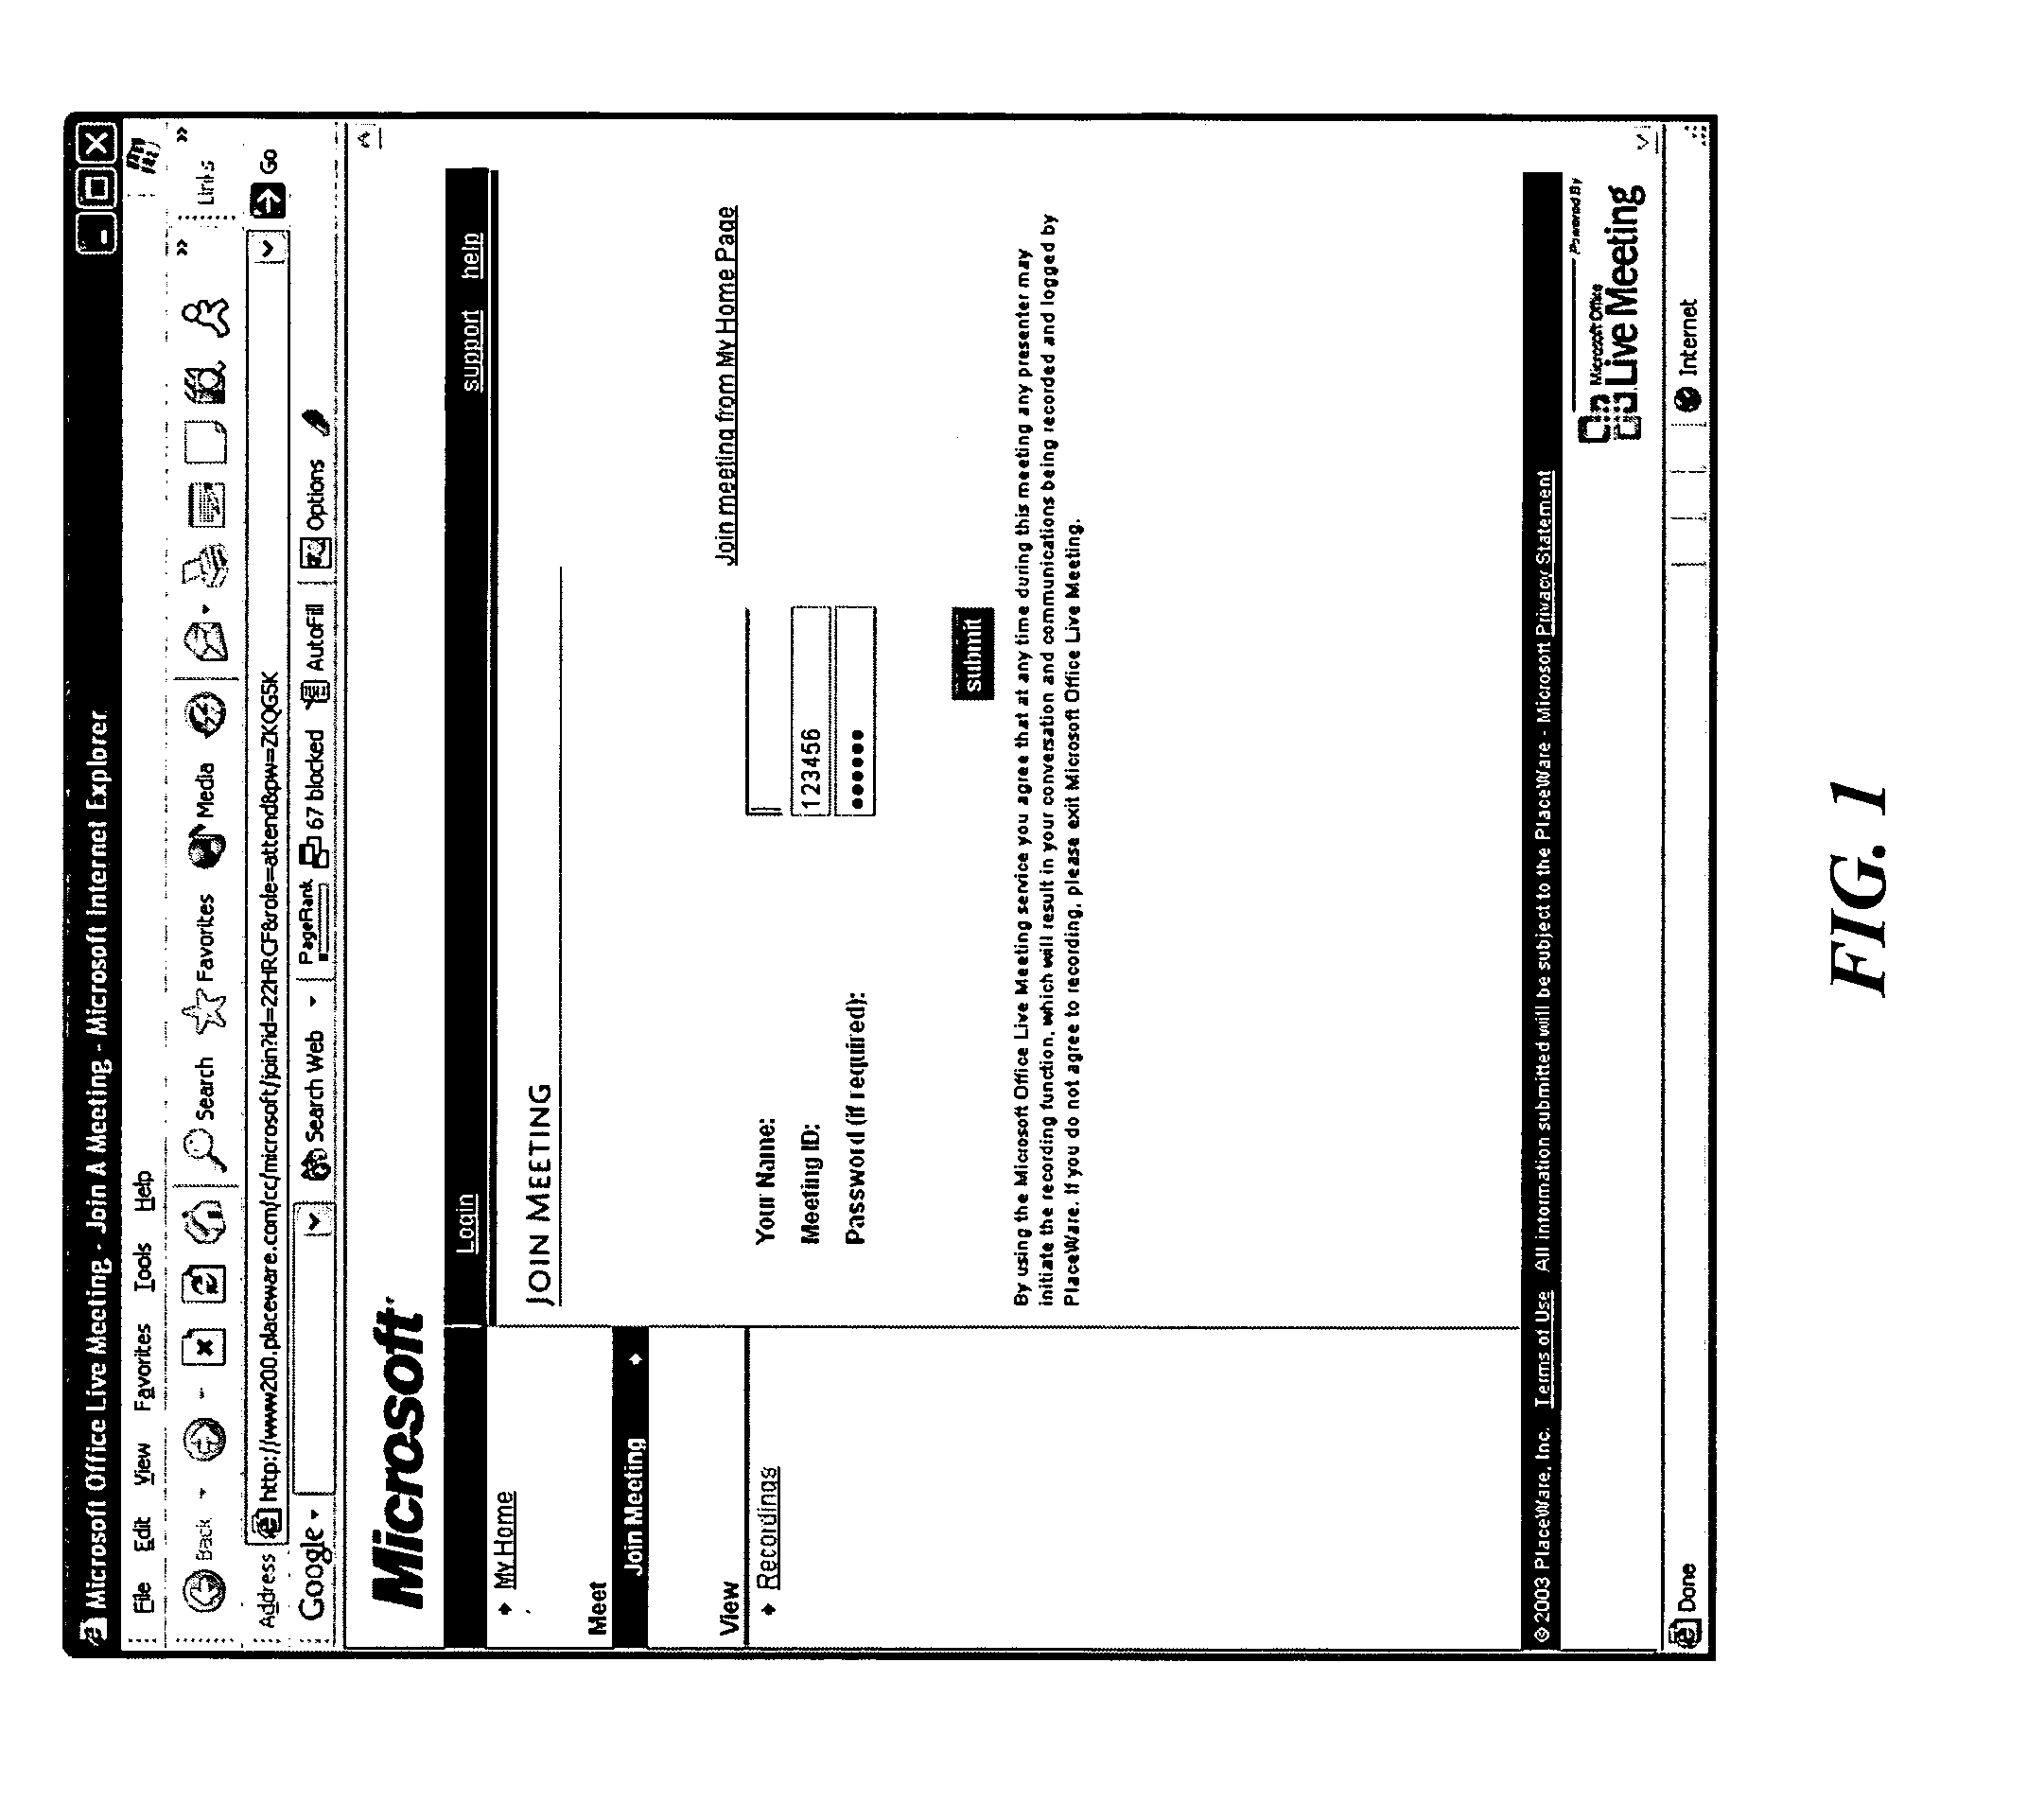 Method and system for installing applications via a display page